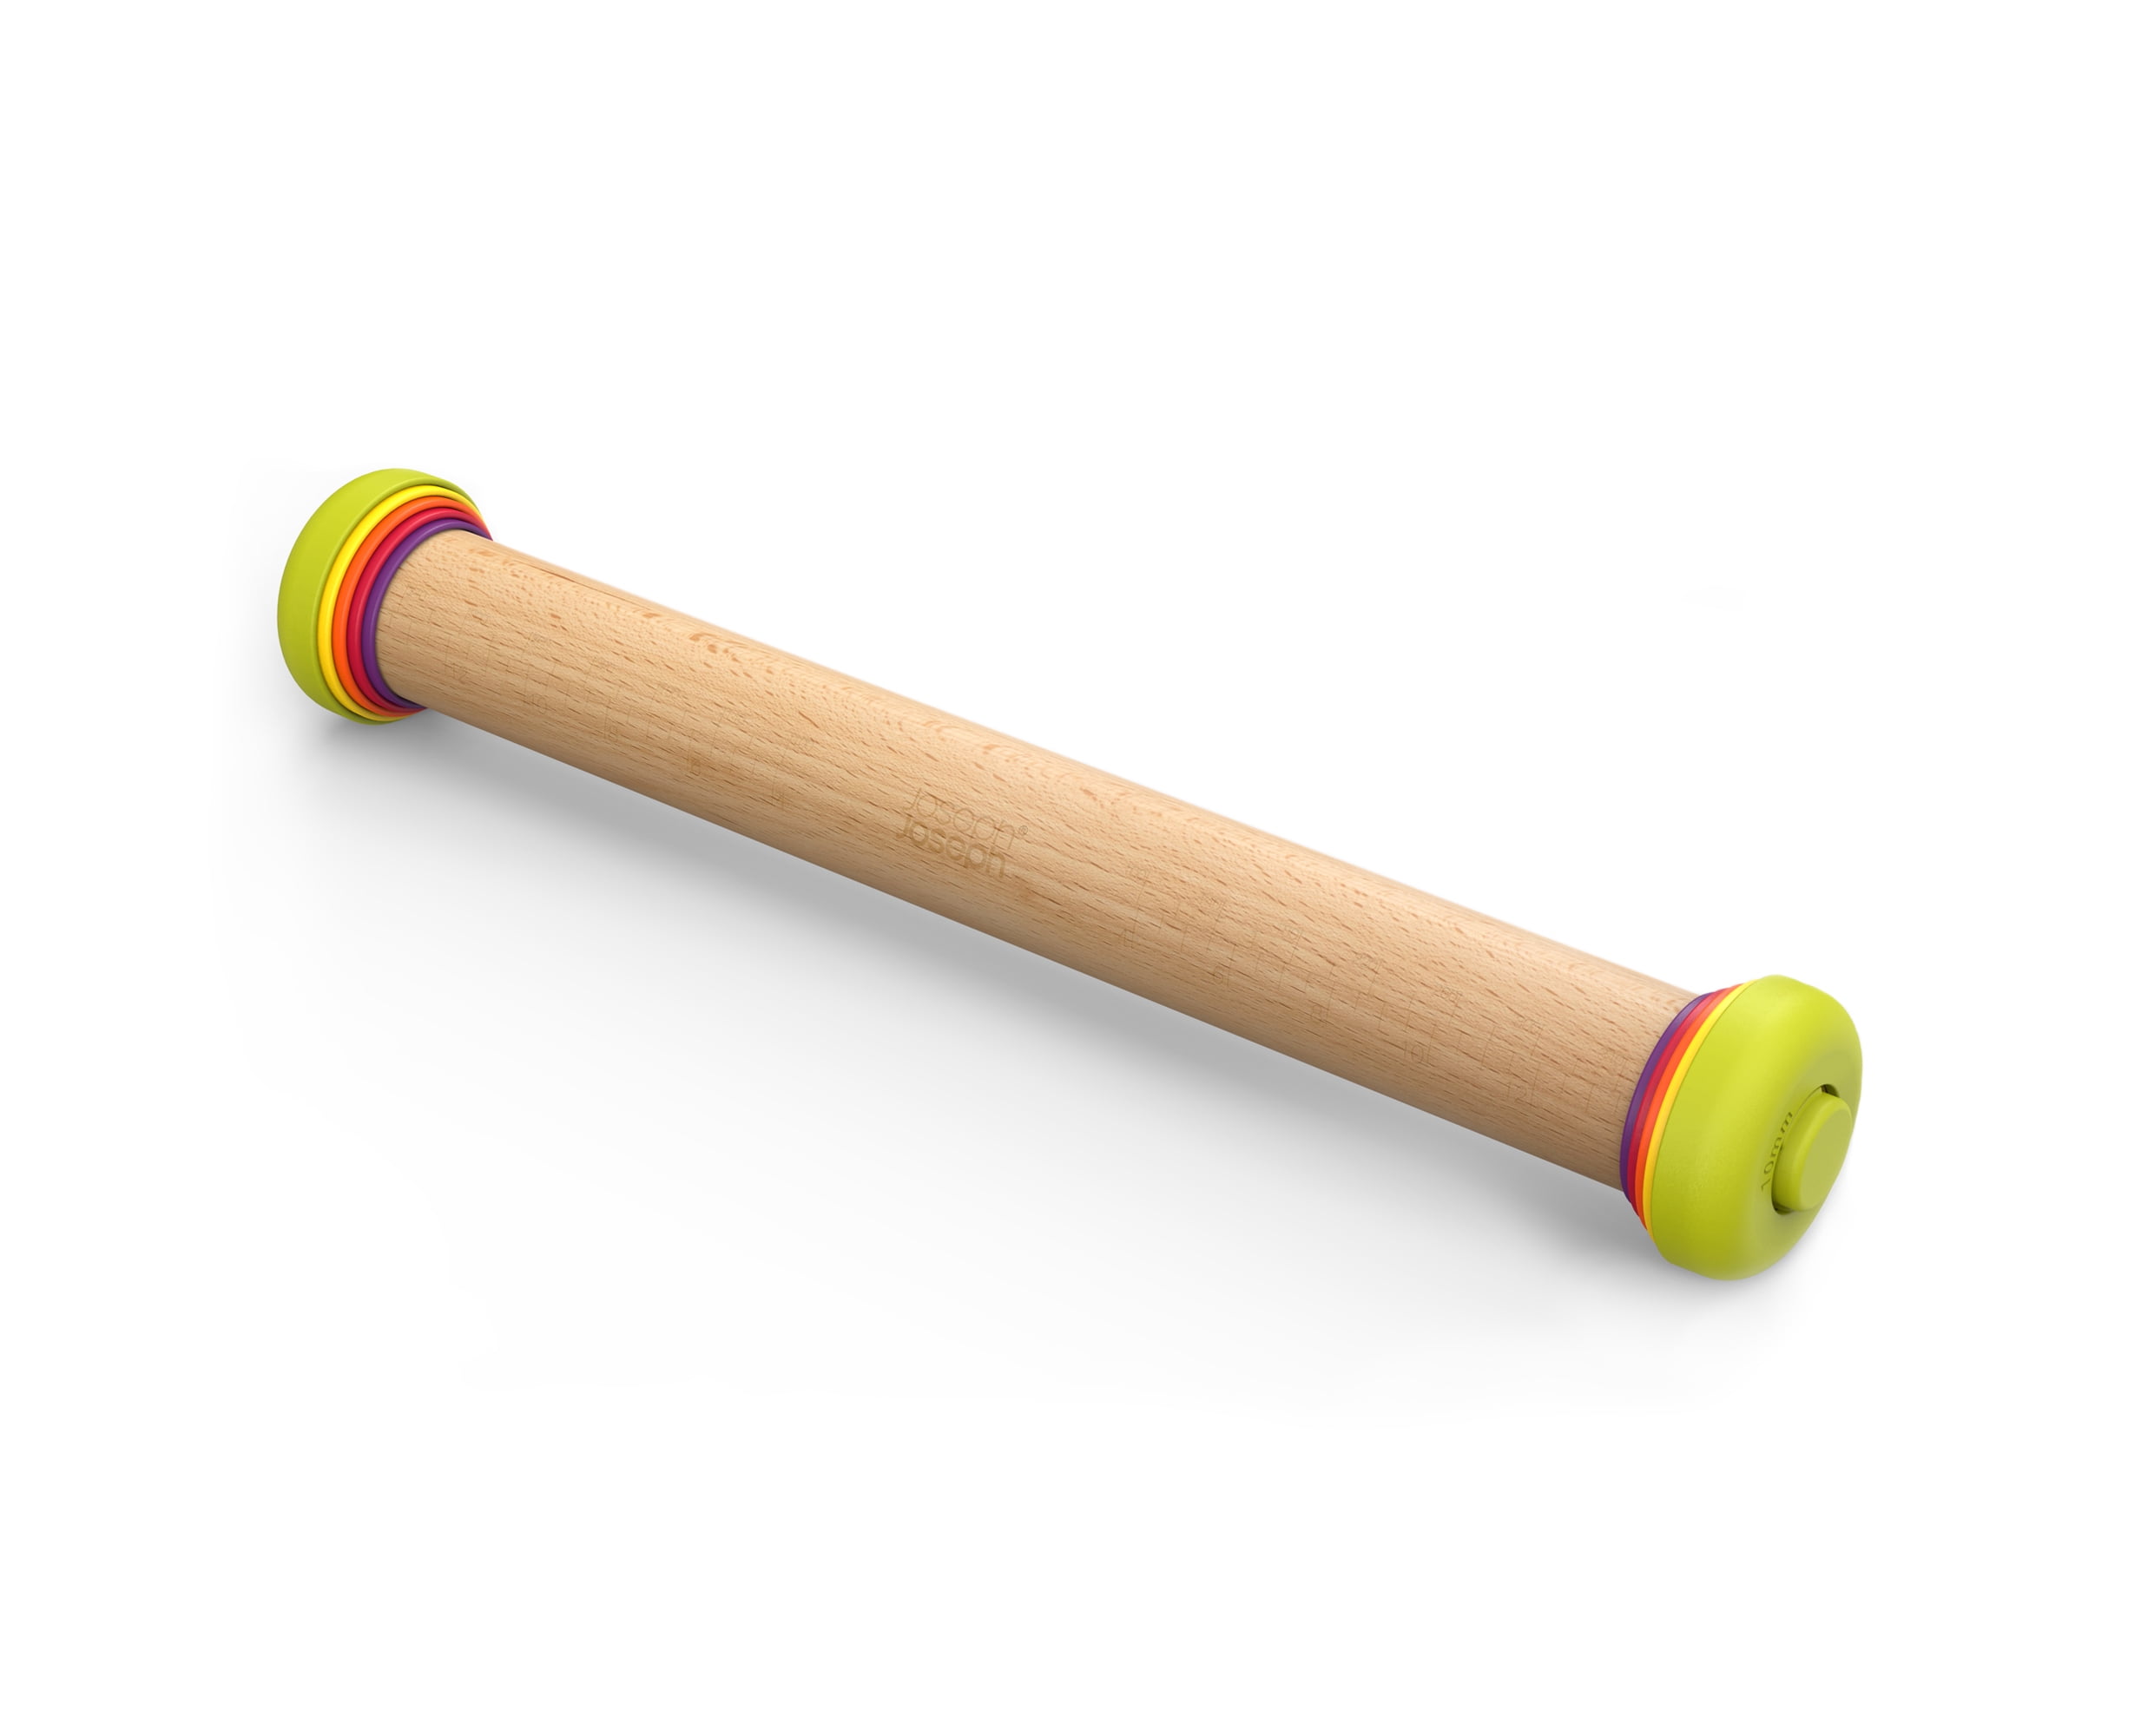 PrecisionPin™ Adjustable Rolling Pin - Blue